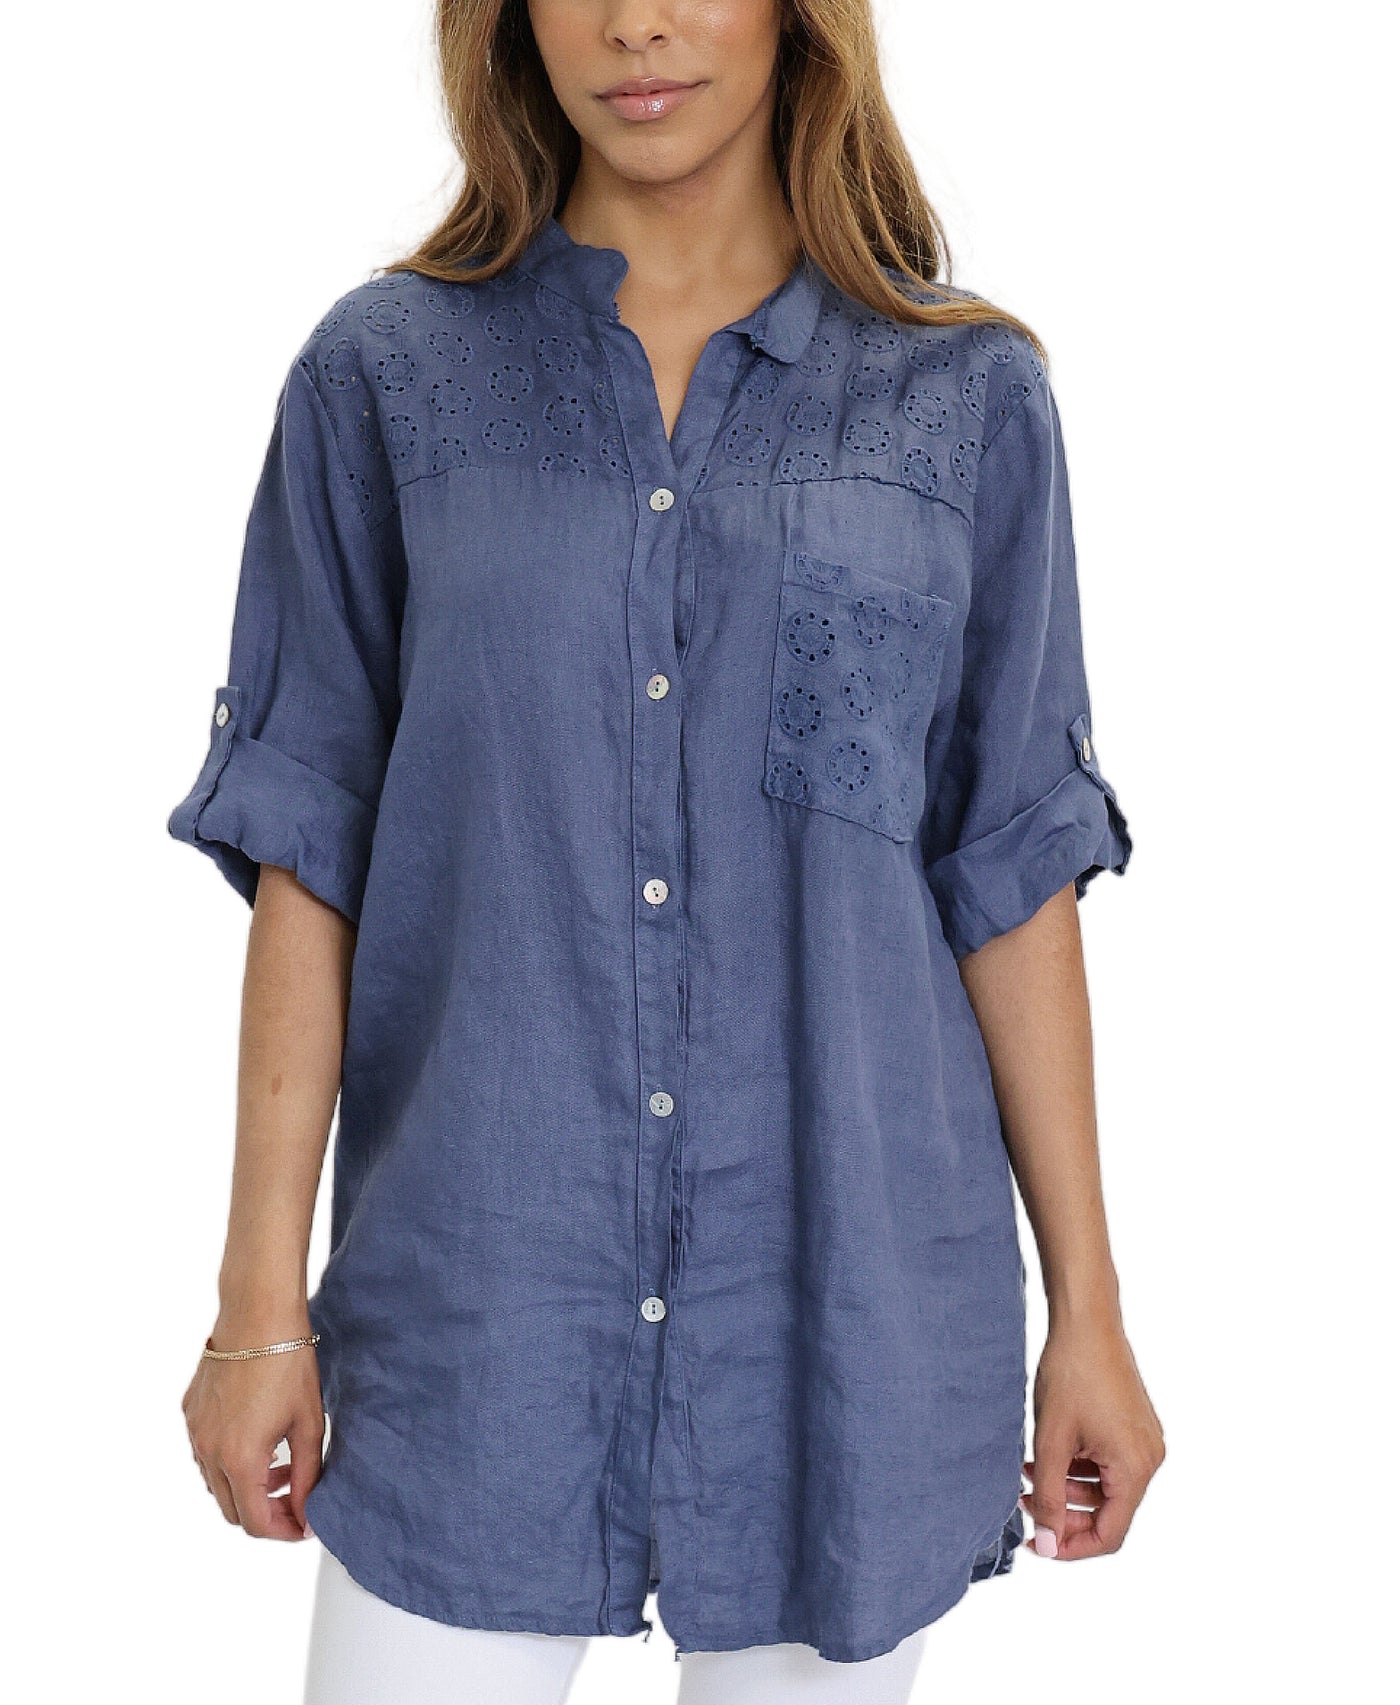 Linen Shirt w/ Eyelet Accents image 1